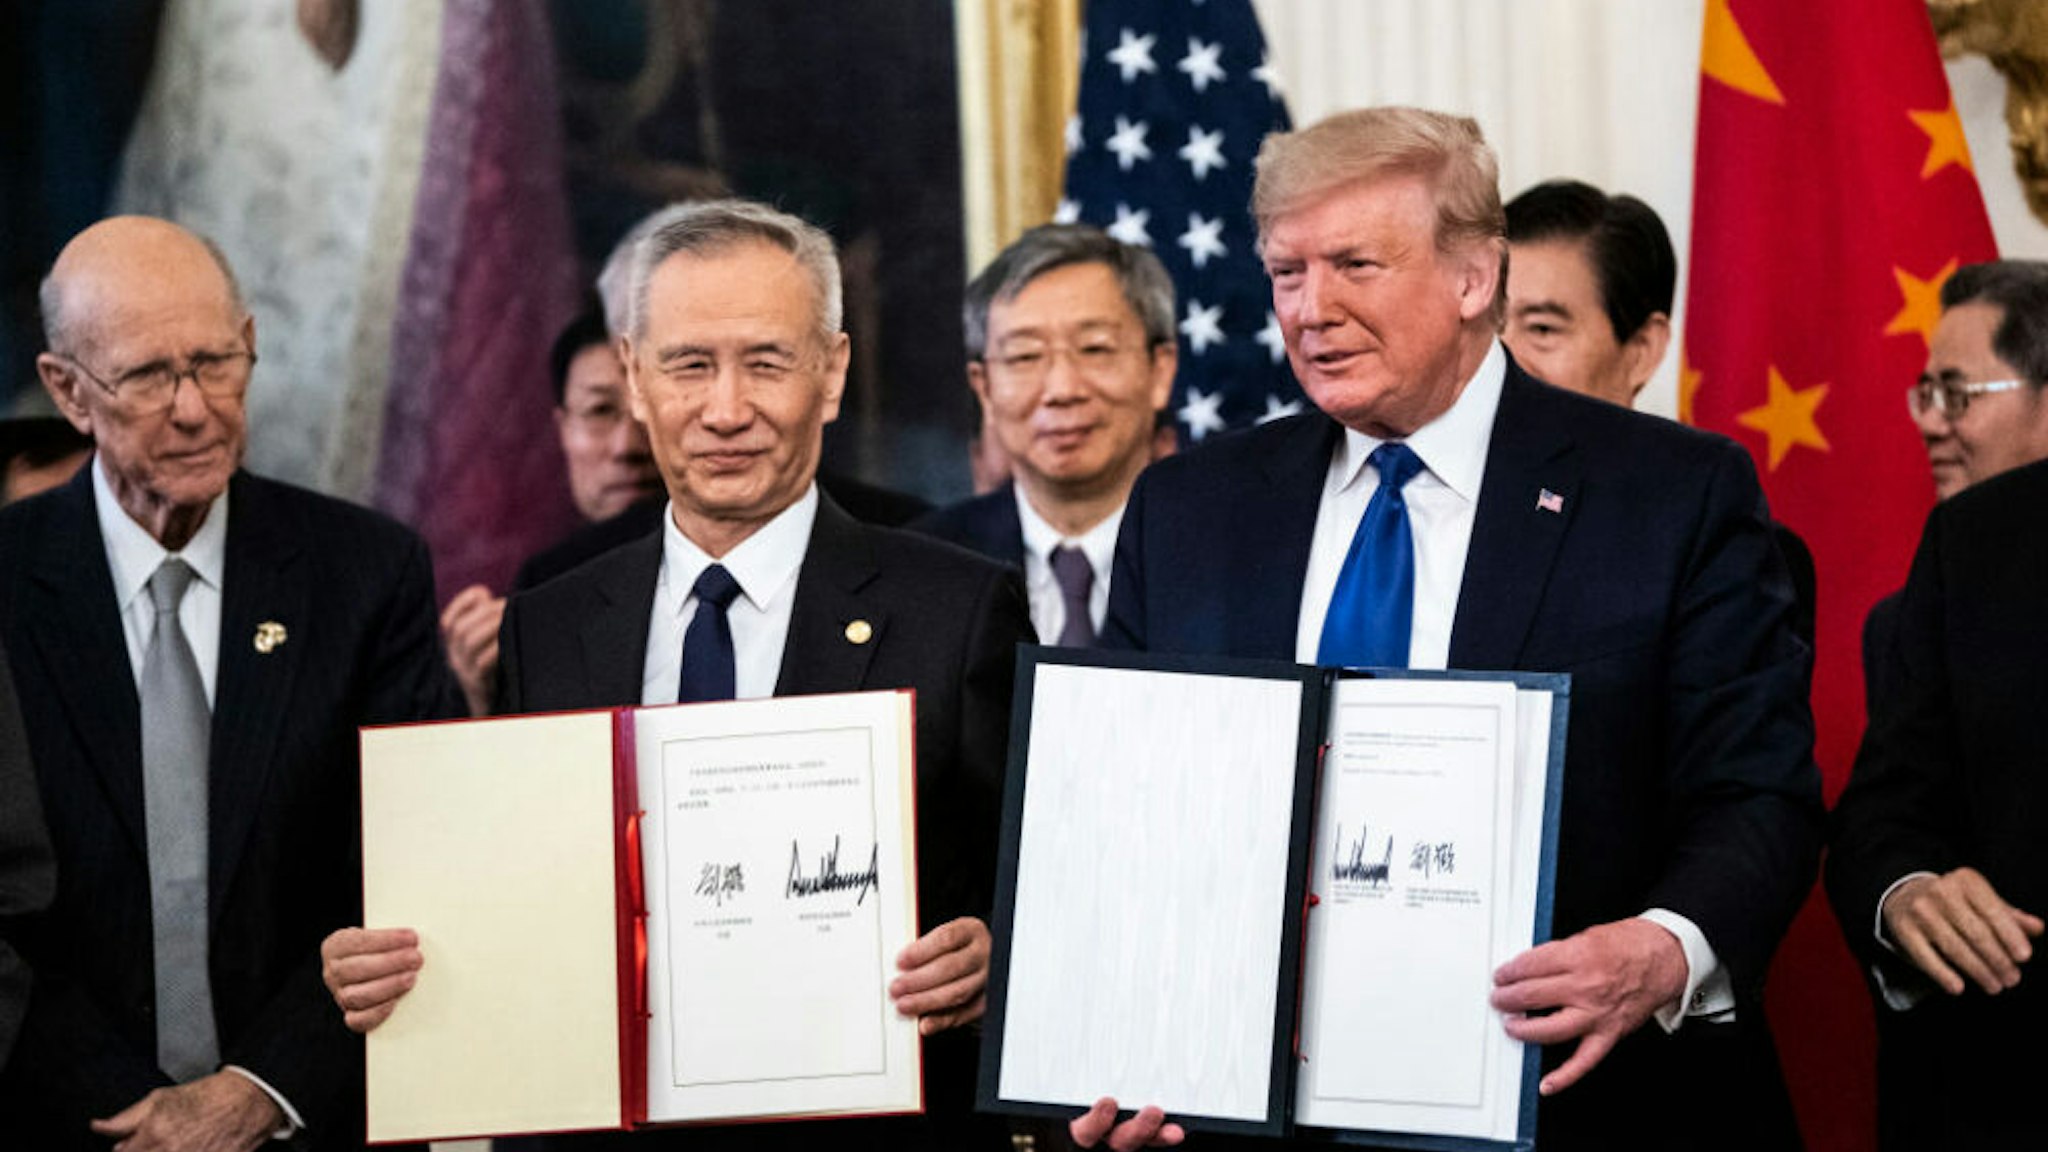 WASHINGTON, DC - JANUARY 15 : President Donald J. Trump signs a trade agreement with Chinese Vice Premier of the People's Republic of China, Liu He in the East Room at the White House on Wednesday, Jan 15, 2020 in Washington, DC.